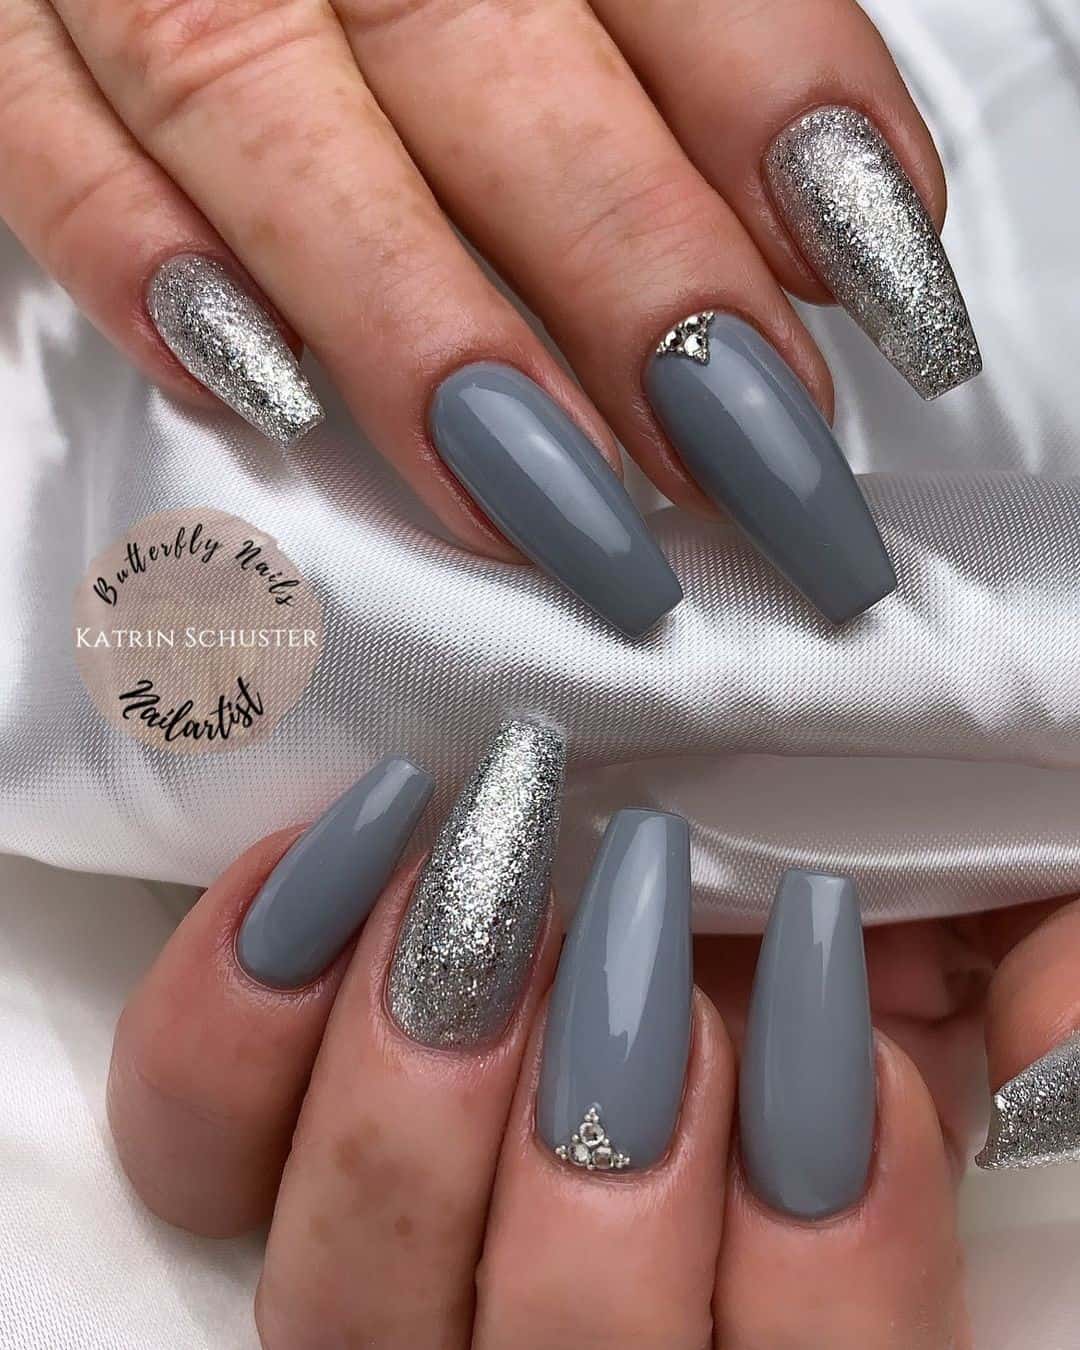 Shimmery Winter Nails With Glitter